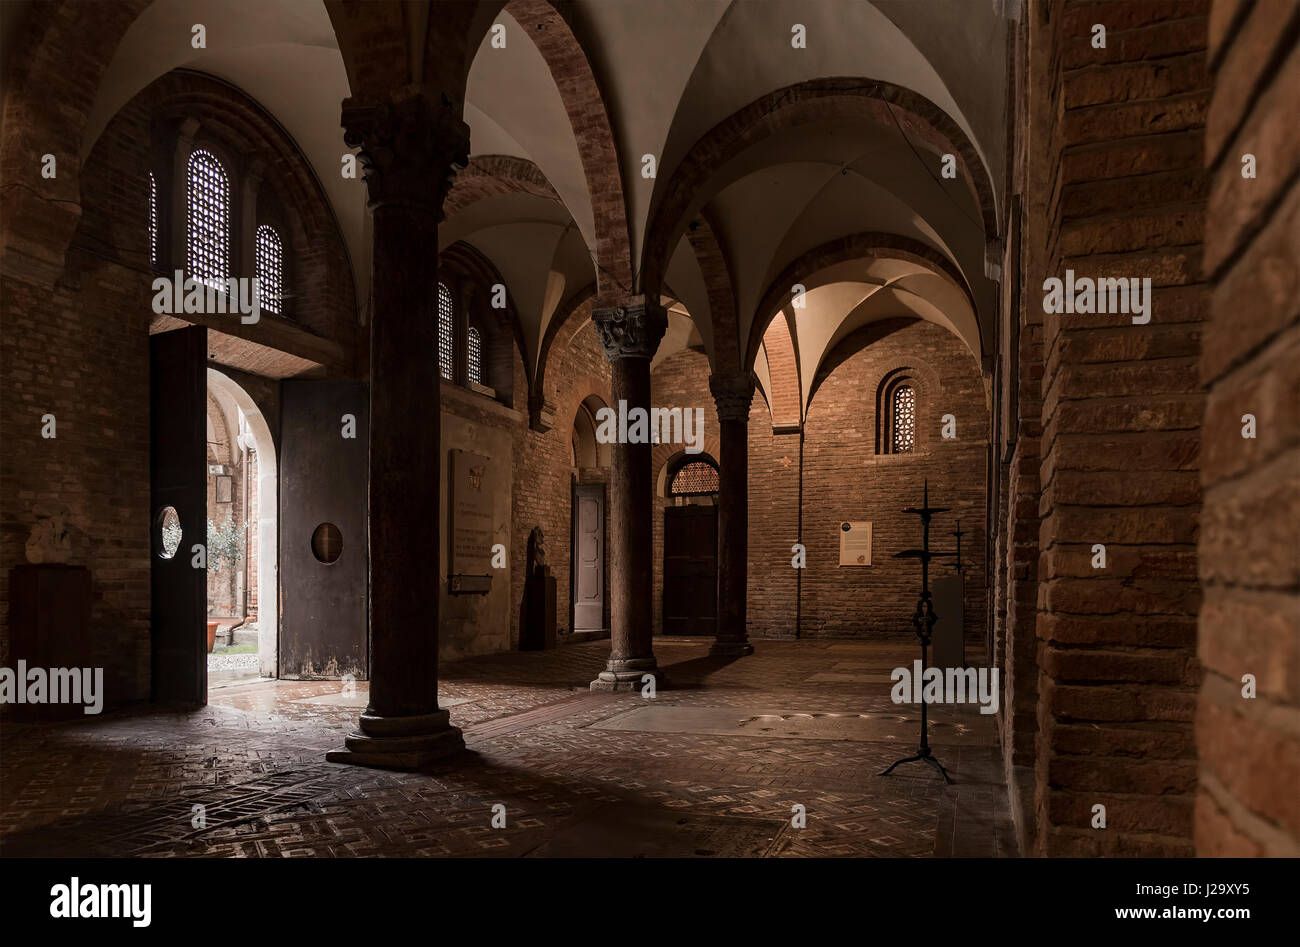 BOLOGNA, ITALY - FEBRUARY 06, 2017. Columns and vaulted ceilings inside the church of Santo Stefano. (some noise) Stock Photo